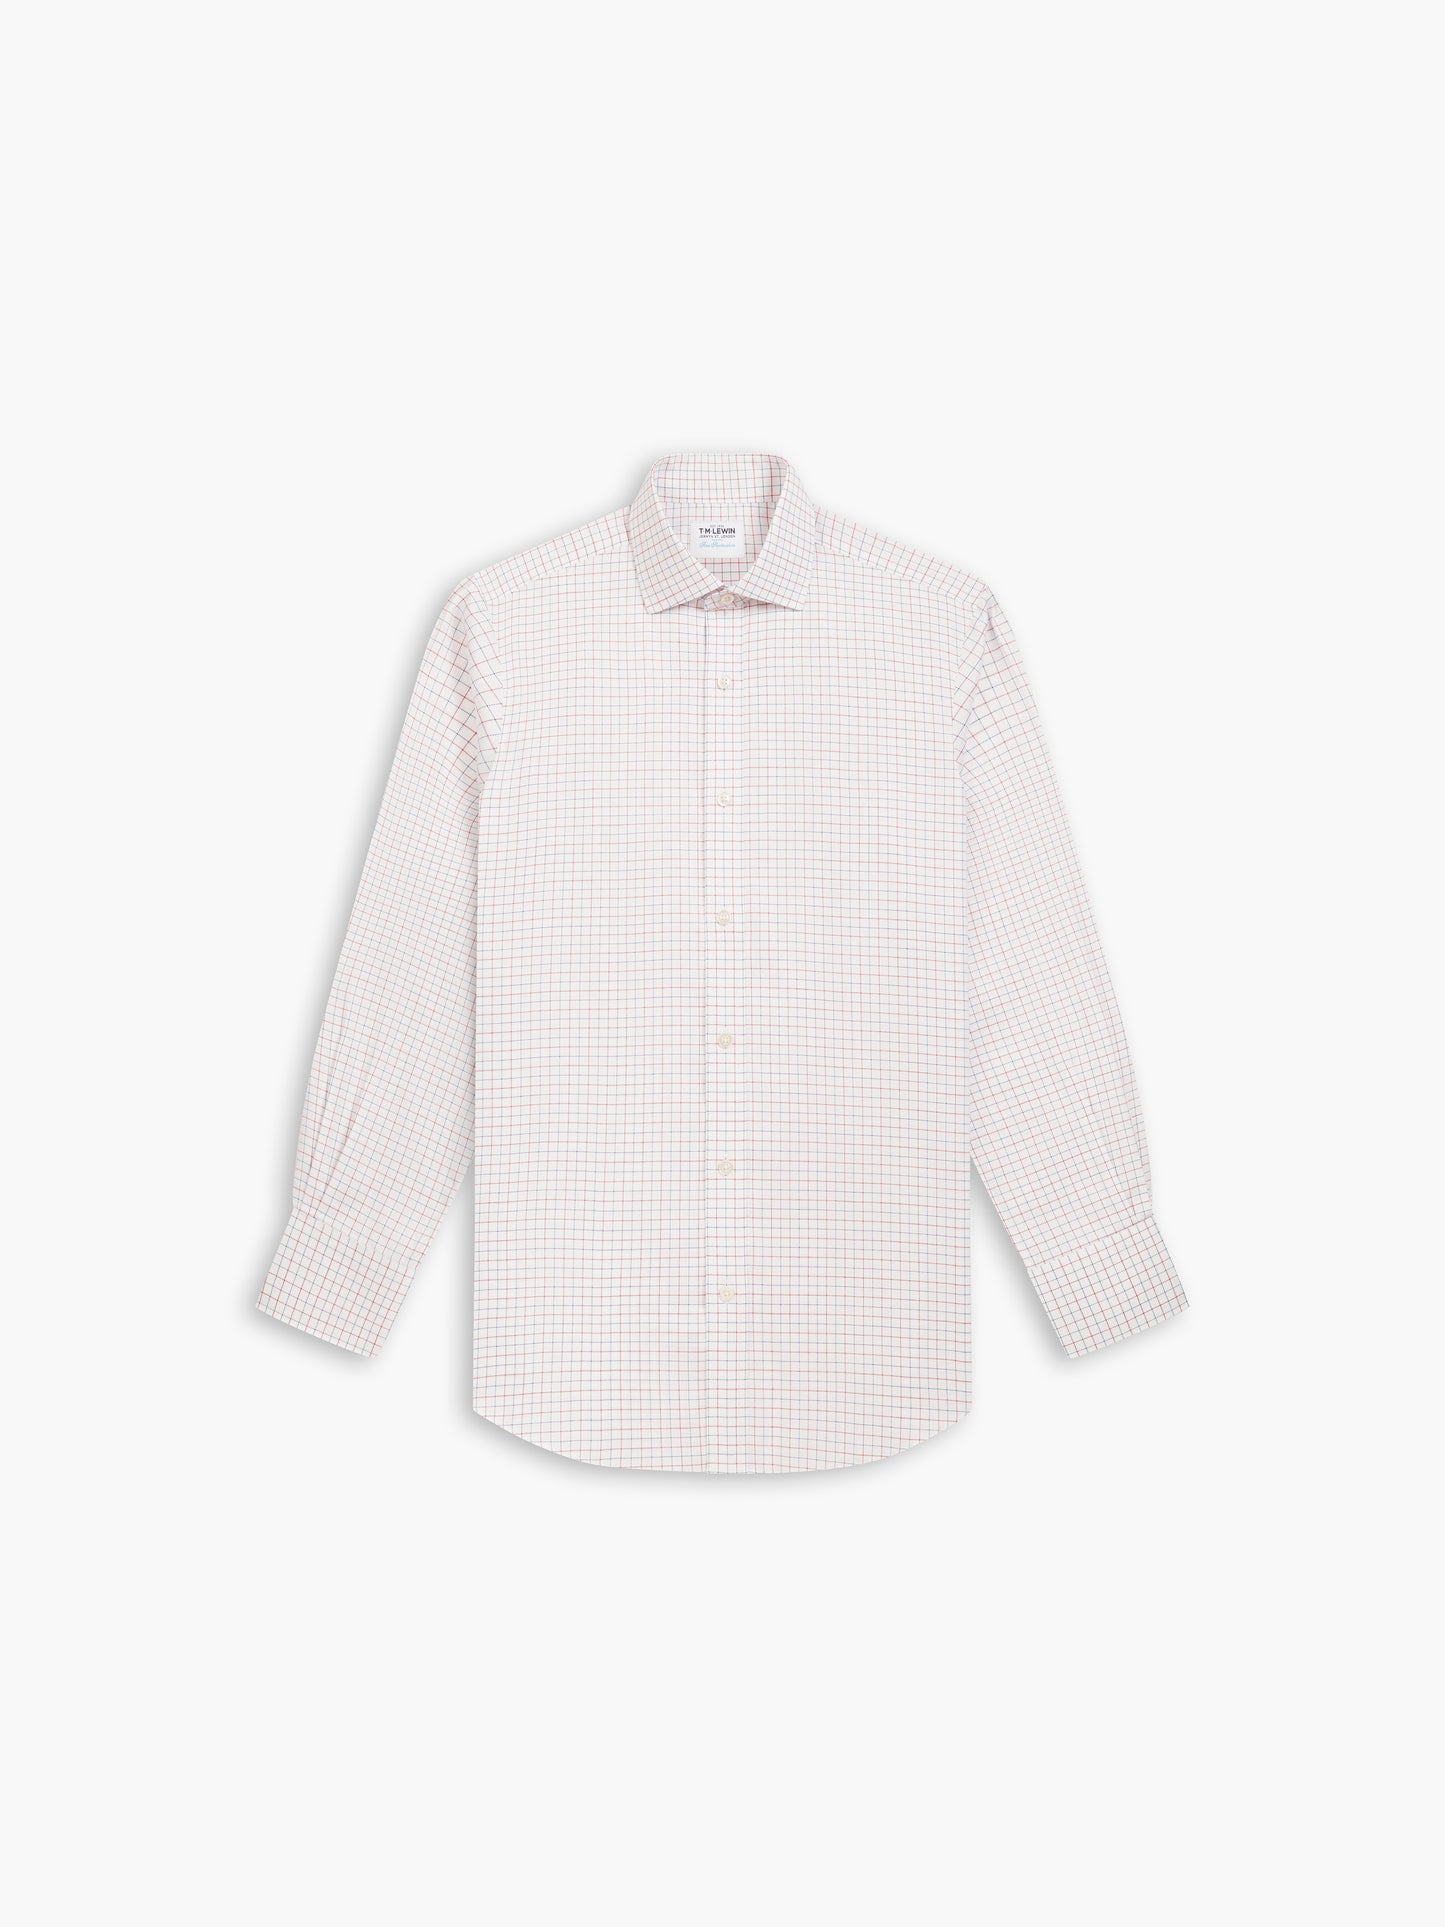 Image 2 of Non-Iron Navy & Red Double Check Oxford Regular Fit Single Cuff Classic Collar Shirt